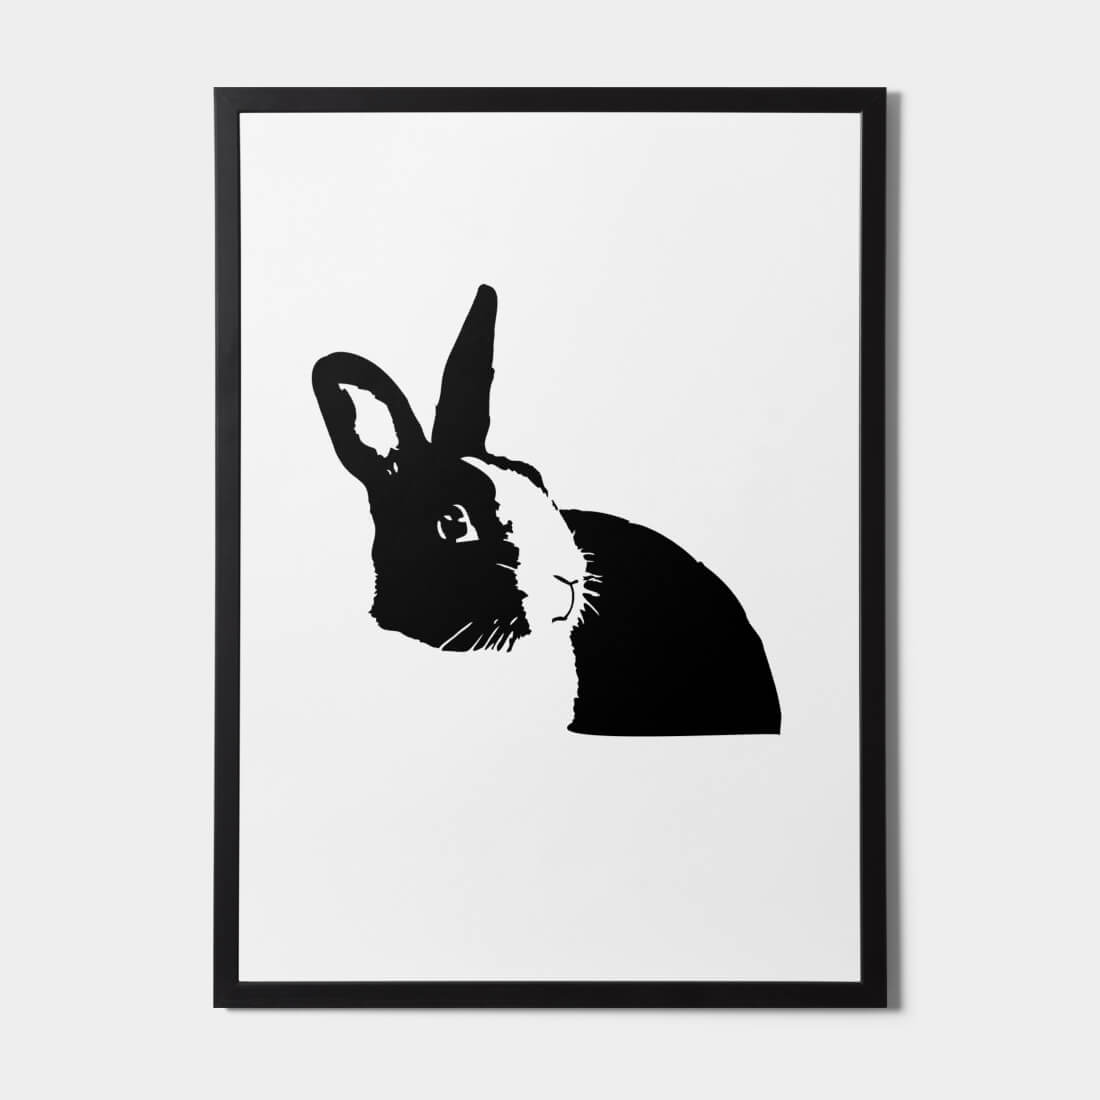 A black rabbit is drawn on a white picture.